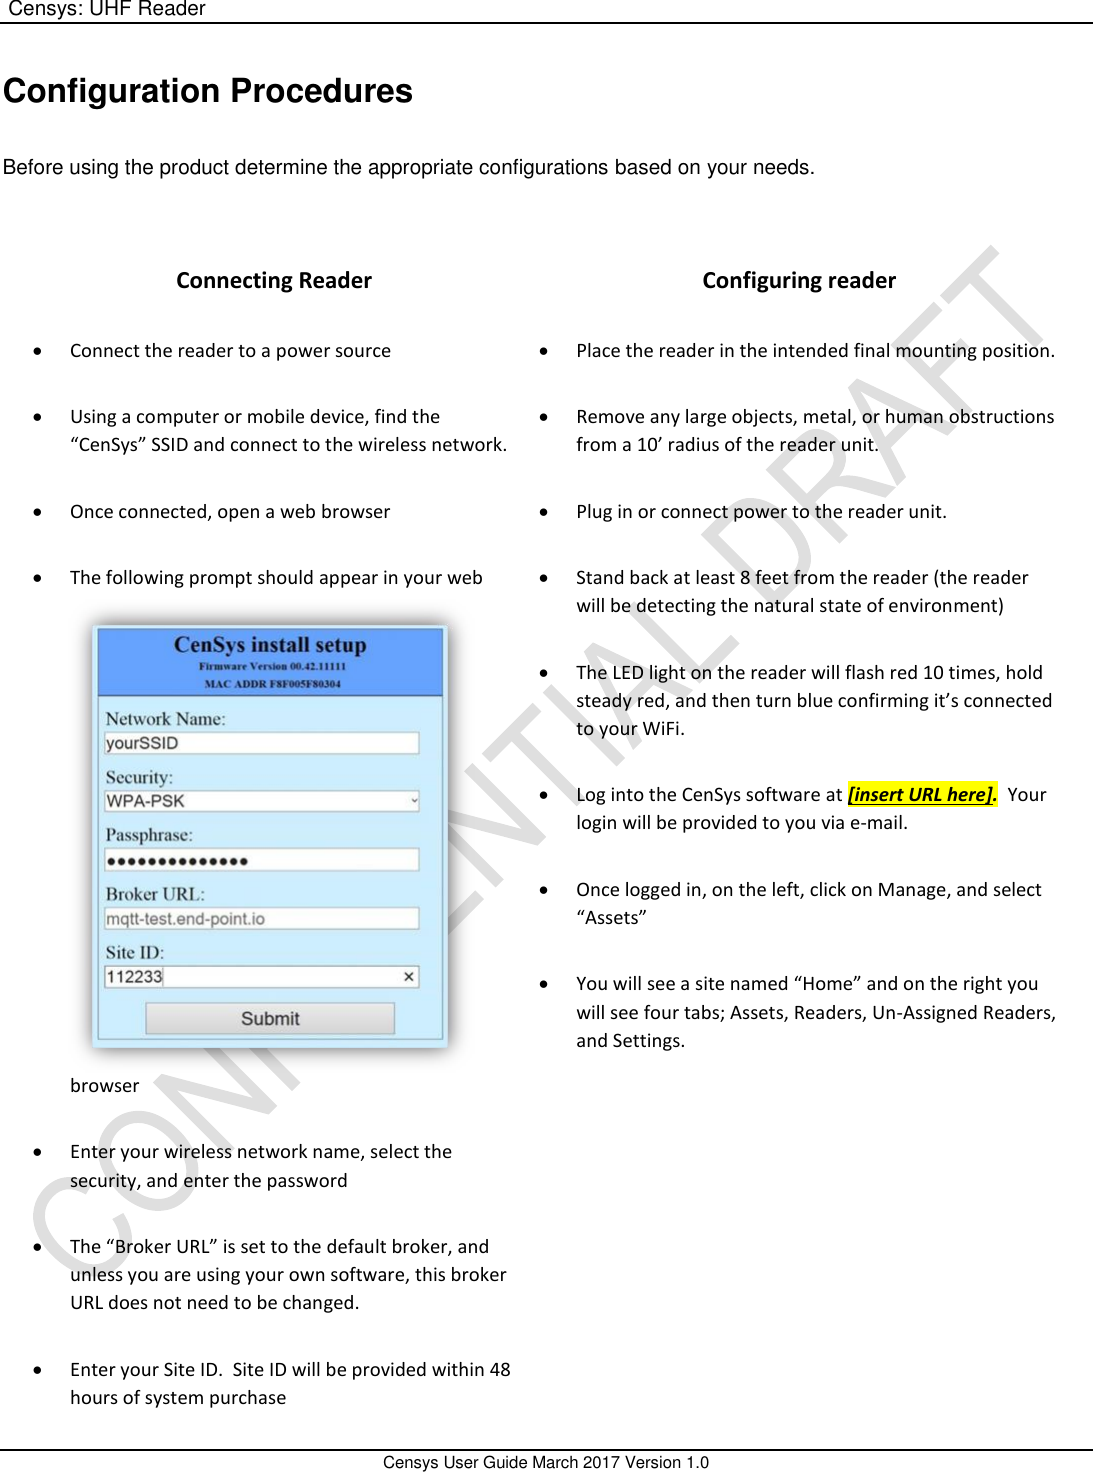  Censys: UHF Reader       Censys User Guide March 2017 Version 1.0  Configuration Procedures   Before using the product determine the appropriate configurations based on your needs.      Connecting Reader  Connect the reader to a power source  Using a computer or mobile device, find the “CenSys” SSID and connect to the wireless network.  Once connected, open a web browser  The following prompt should appear in your web browser  Enter your wireless network name, select the security, and enter the password  The “Broker URL” is set to the default broker, and unless you are using your own software, this broker URL does not need to be changed.  Enter your Site ID.  Site ID will be provided within 48 hours of system purchase Configuring reader  Place the reader in the intended final mounting position.  Remove any large objects, metal, or human obstructions from a 10’ radius of the reader unit.  Plug in or connect power to the reader unit.  Stand back at least 8 feet from the reader (the reader will be detecting the natural state of environment)  The LED light on the reader will flash red 10 times, hold steady red, and then turn blue confirming it’s connected to your WiFi.  Log into the CenSys software at [insert URL here].  Your login will be provided to you via e-mail.  Once logged in, on the left, click on Manage, and select “Assets”  You will see a site named “Home” and on the right you will see four tabs; Assets, Readers, Un-Assigned Readers, and Settings. 